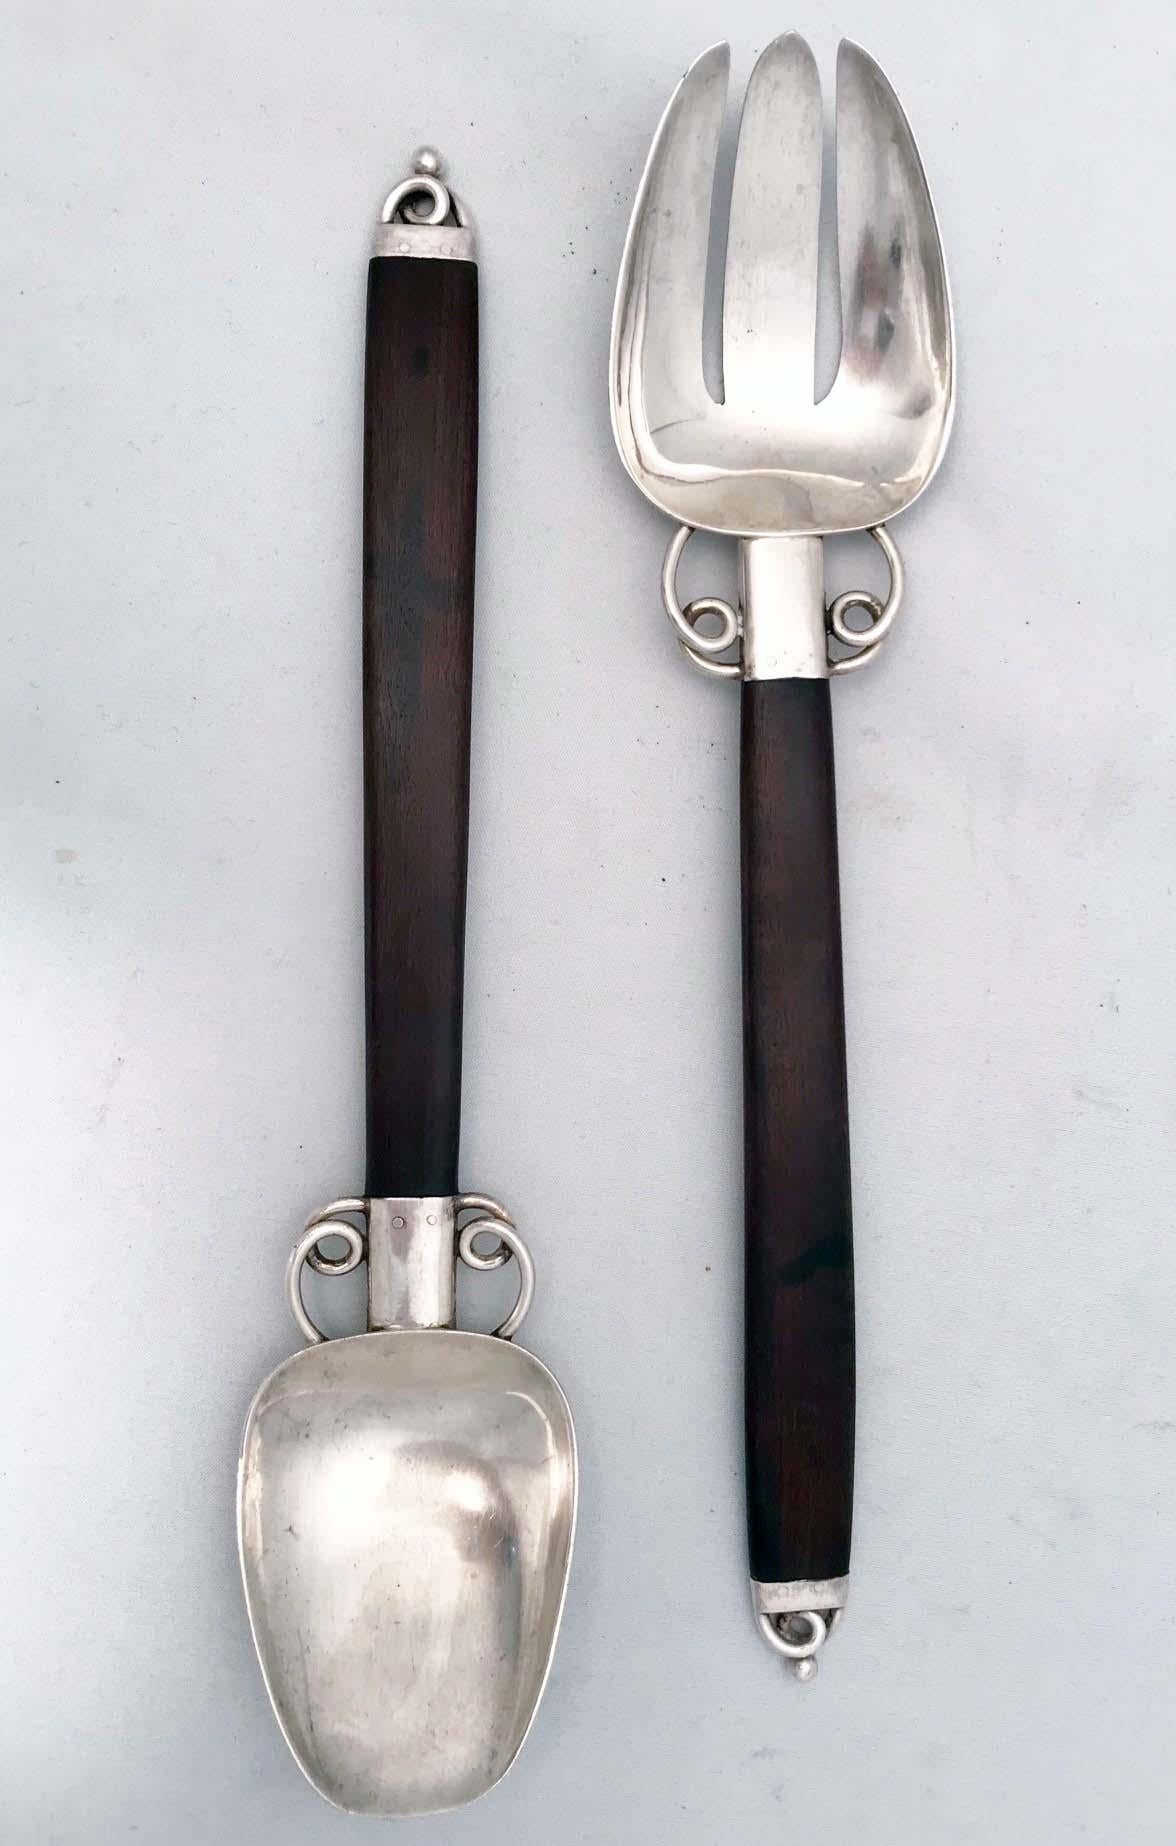 Spratling made numerous stylish items in his day and these salad servers are among that production. The deep brown and slightly redish wood contrasts subtilty with the sterling silver.